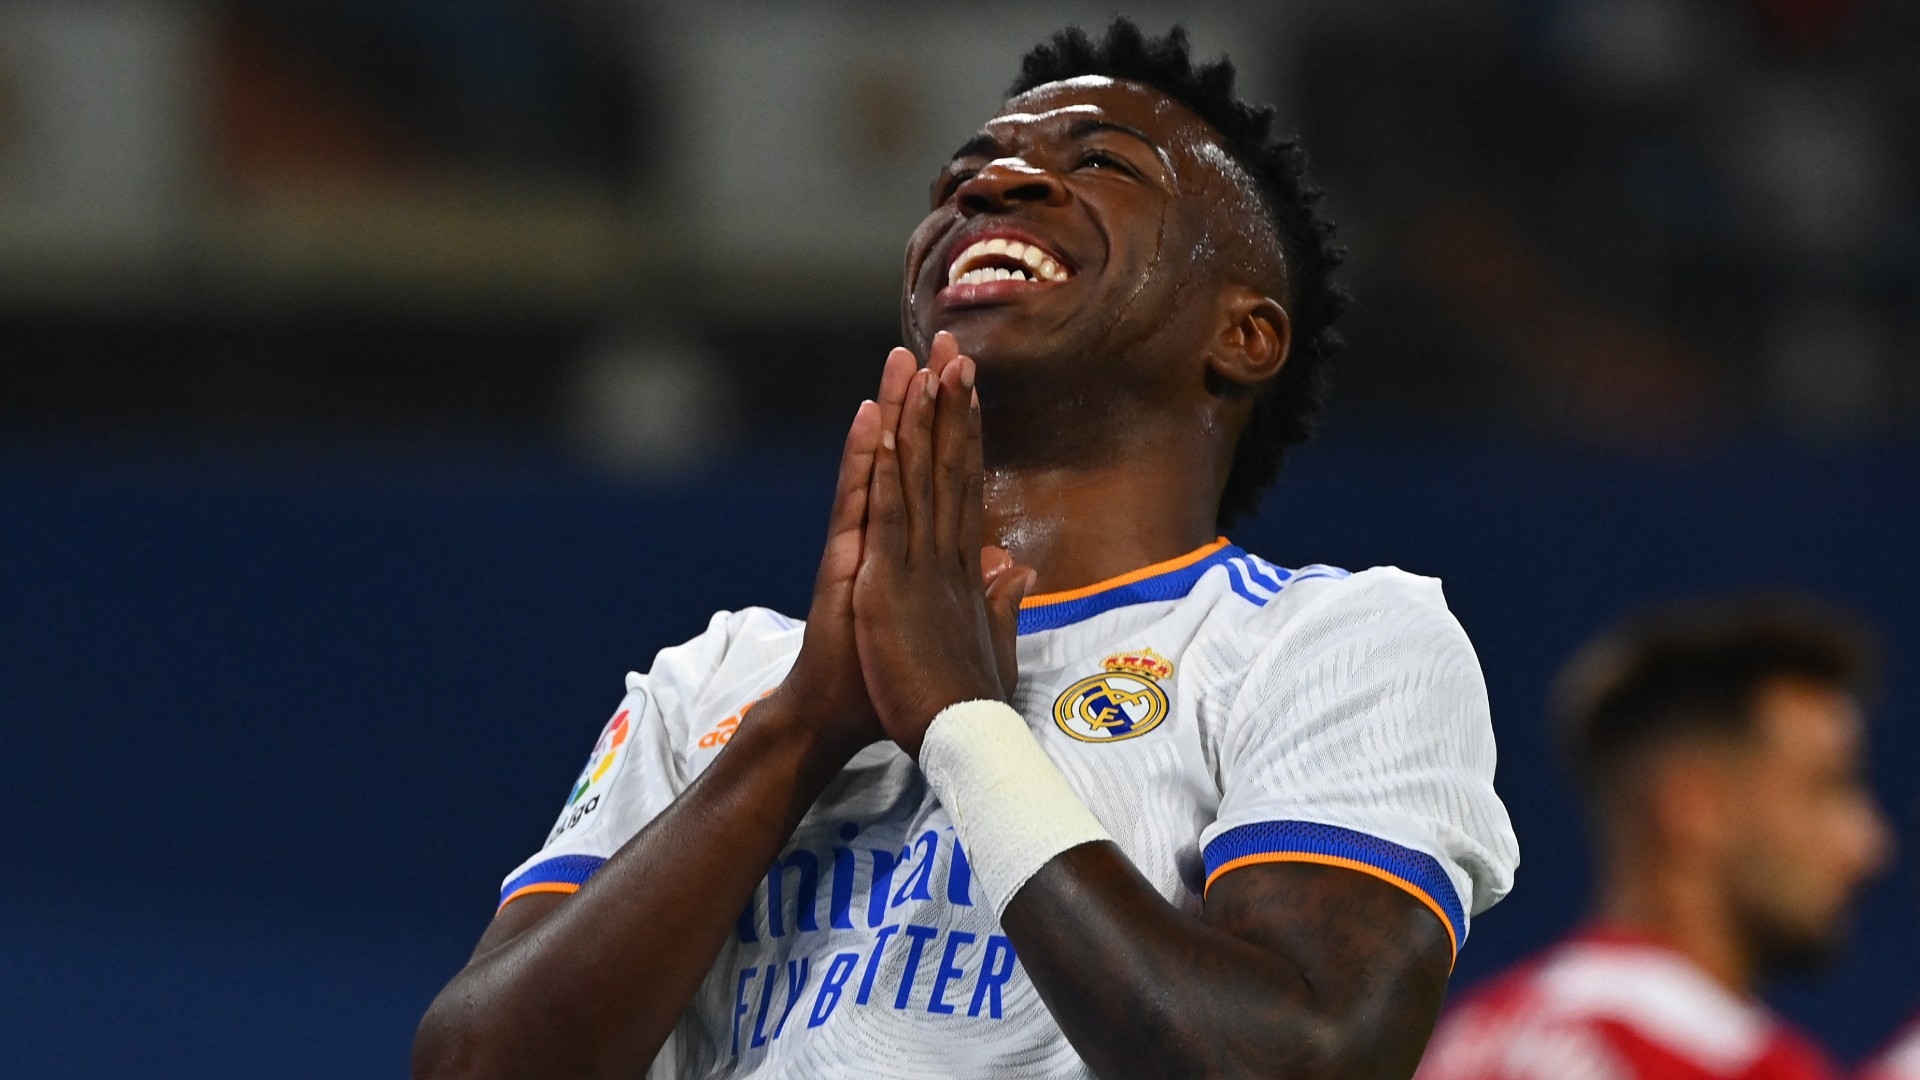 Vinicius Jr One Of The Lowest Paid Members Of Real Madrid's Squad And No New Contract Talks Yet